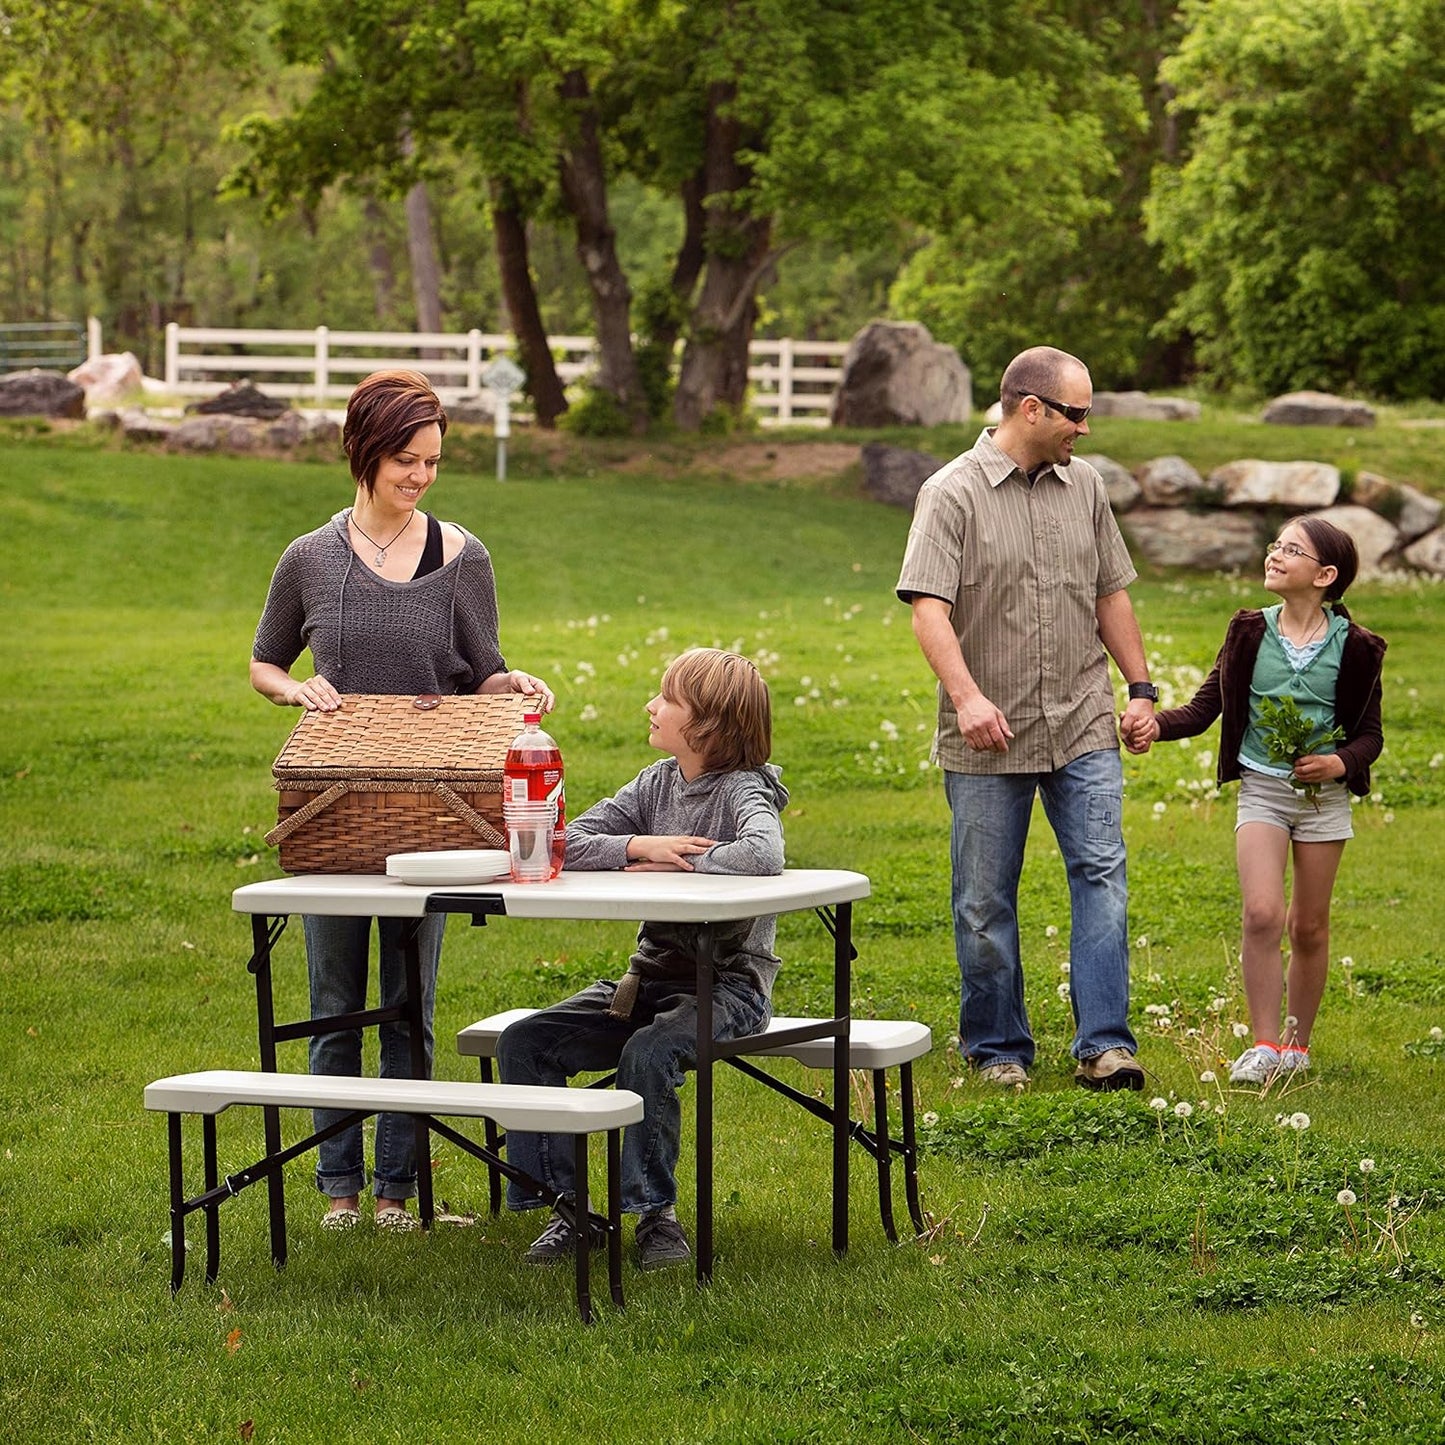 LIFETIME 80373 Portable Folding Camping RV Picnic Table and Bench Set, Almond